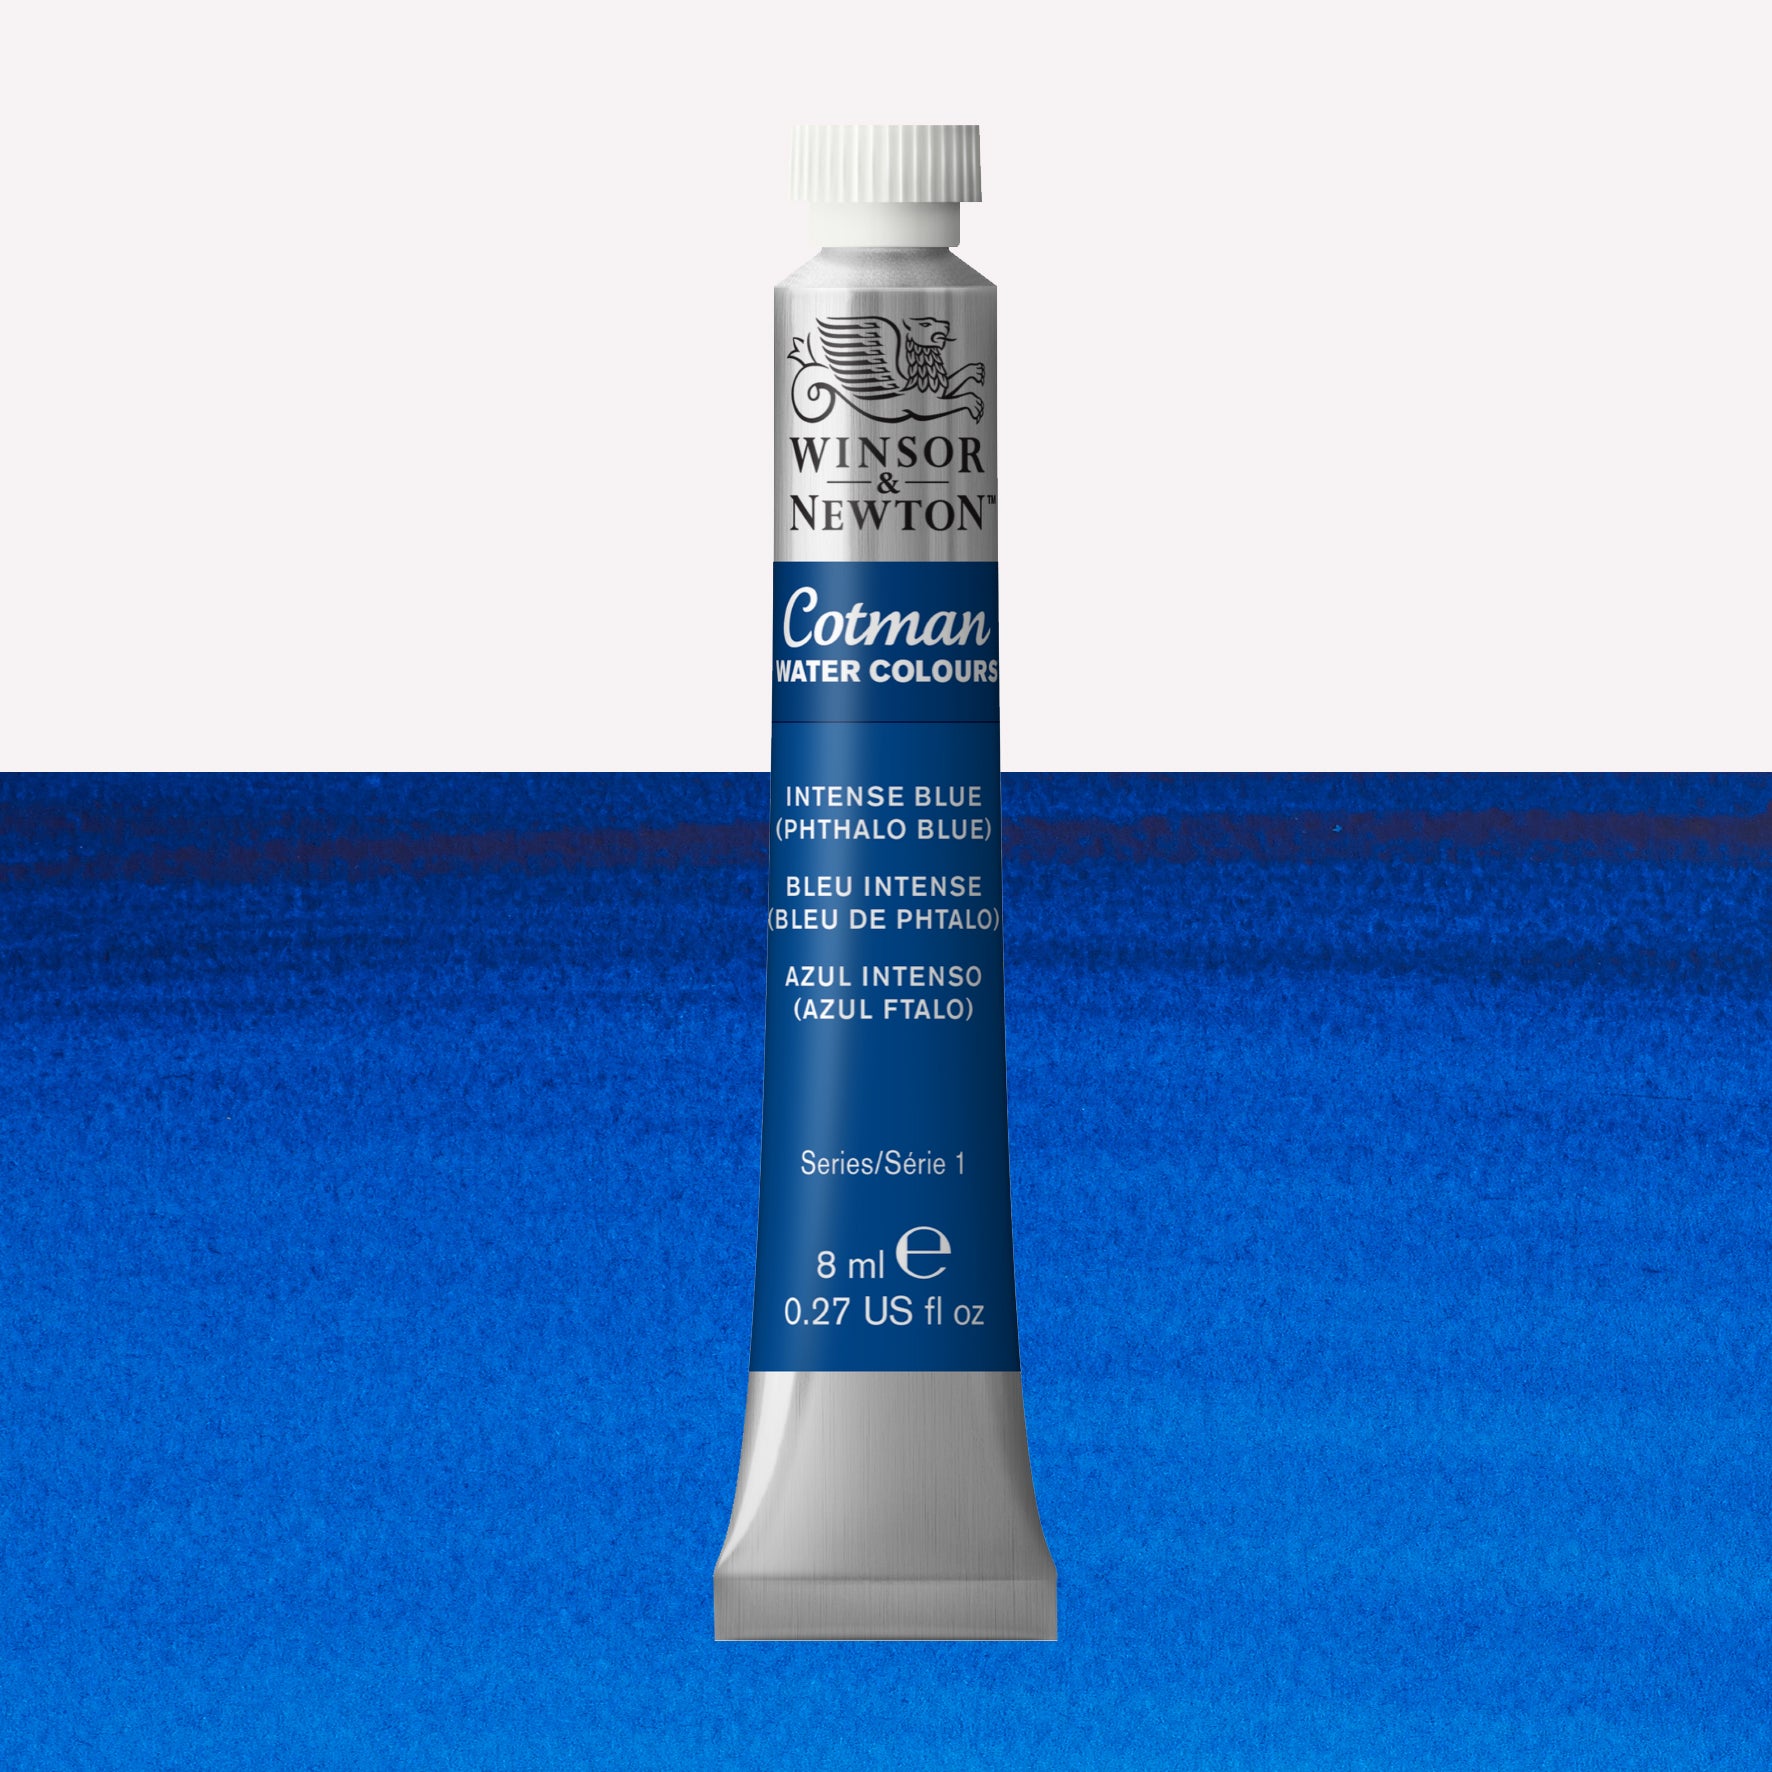 Winsor & Newton Cotman watercolour paint packaged in 8ml silver tube with a white lid in the shade Intense (phthalo) Blue over a highly pigmented colour swatch.